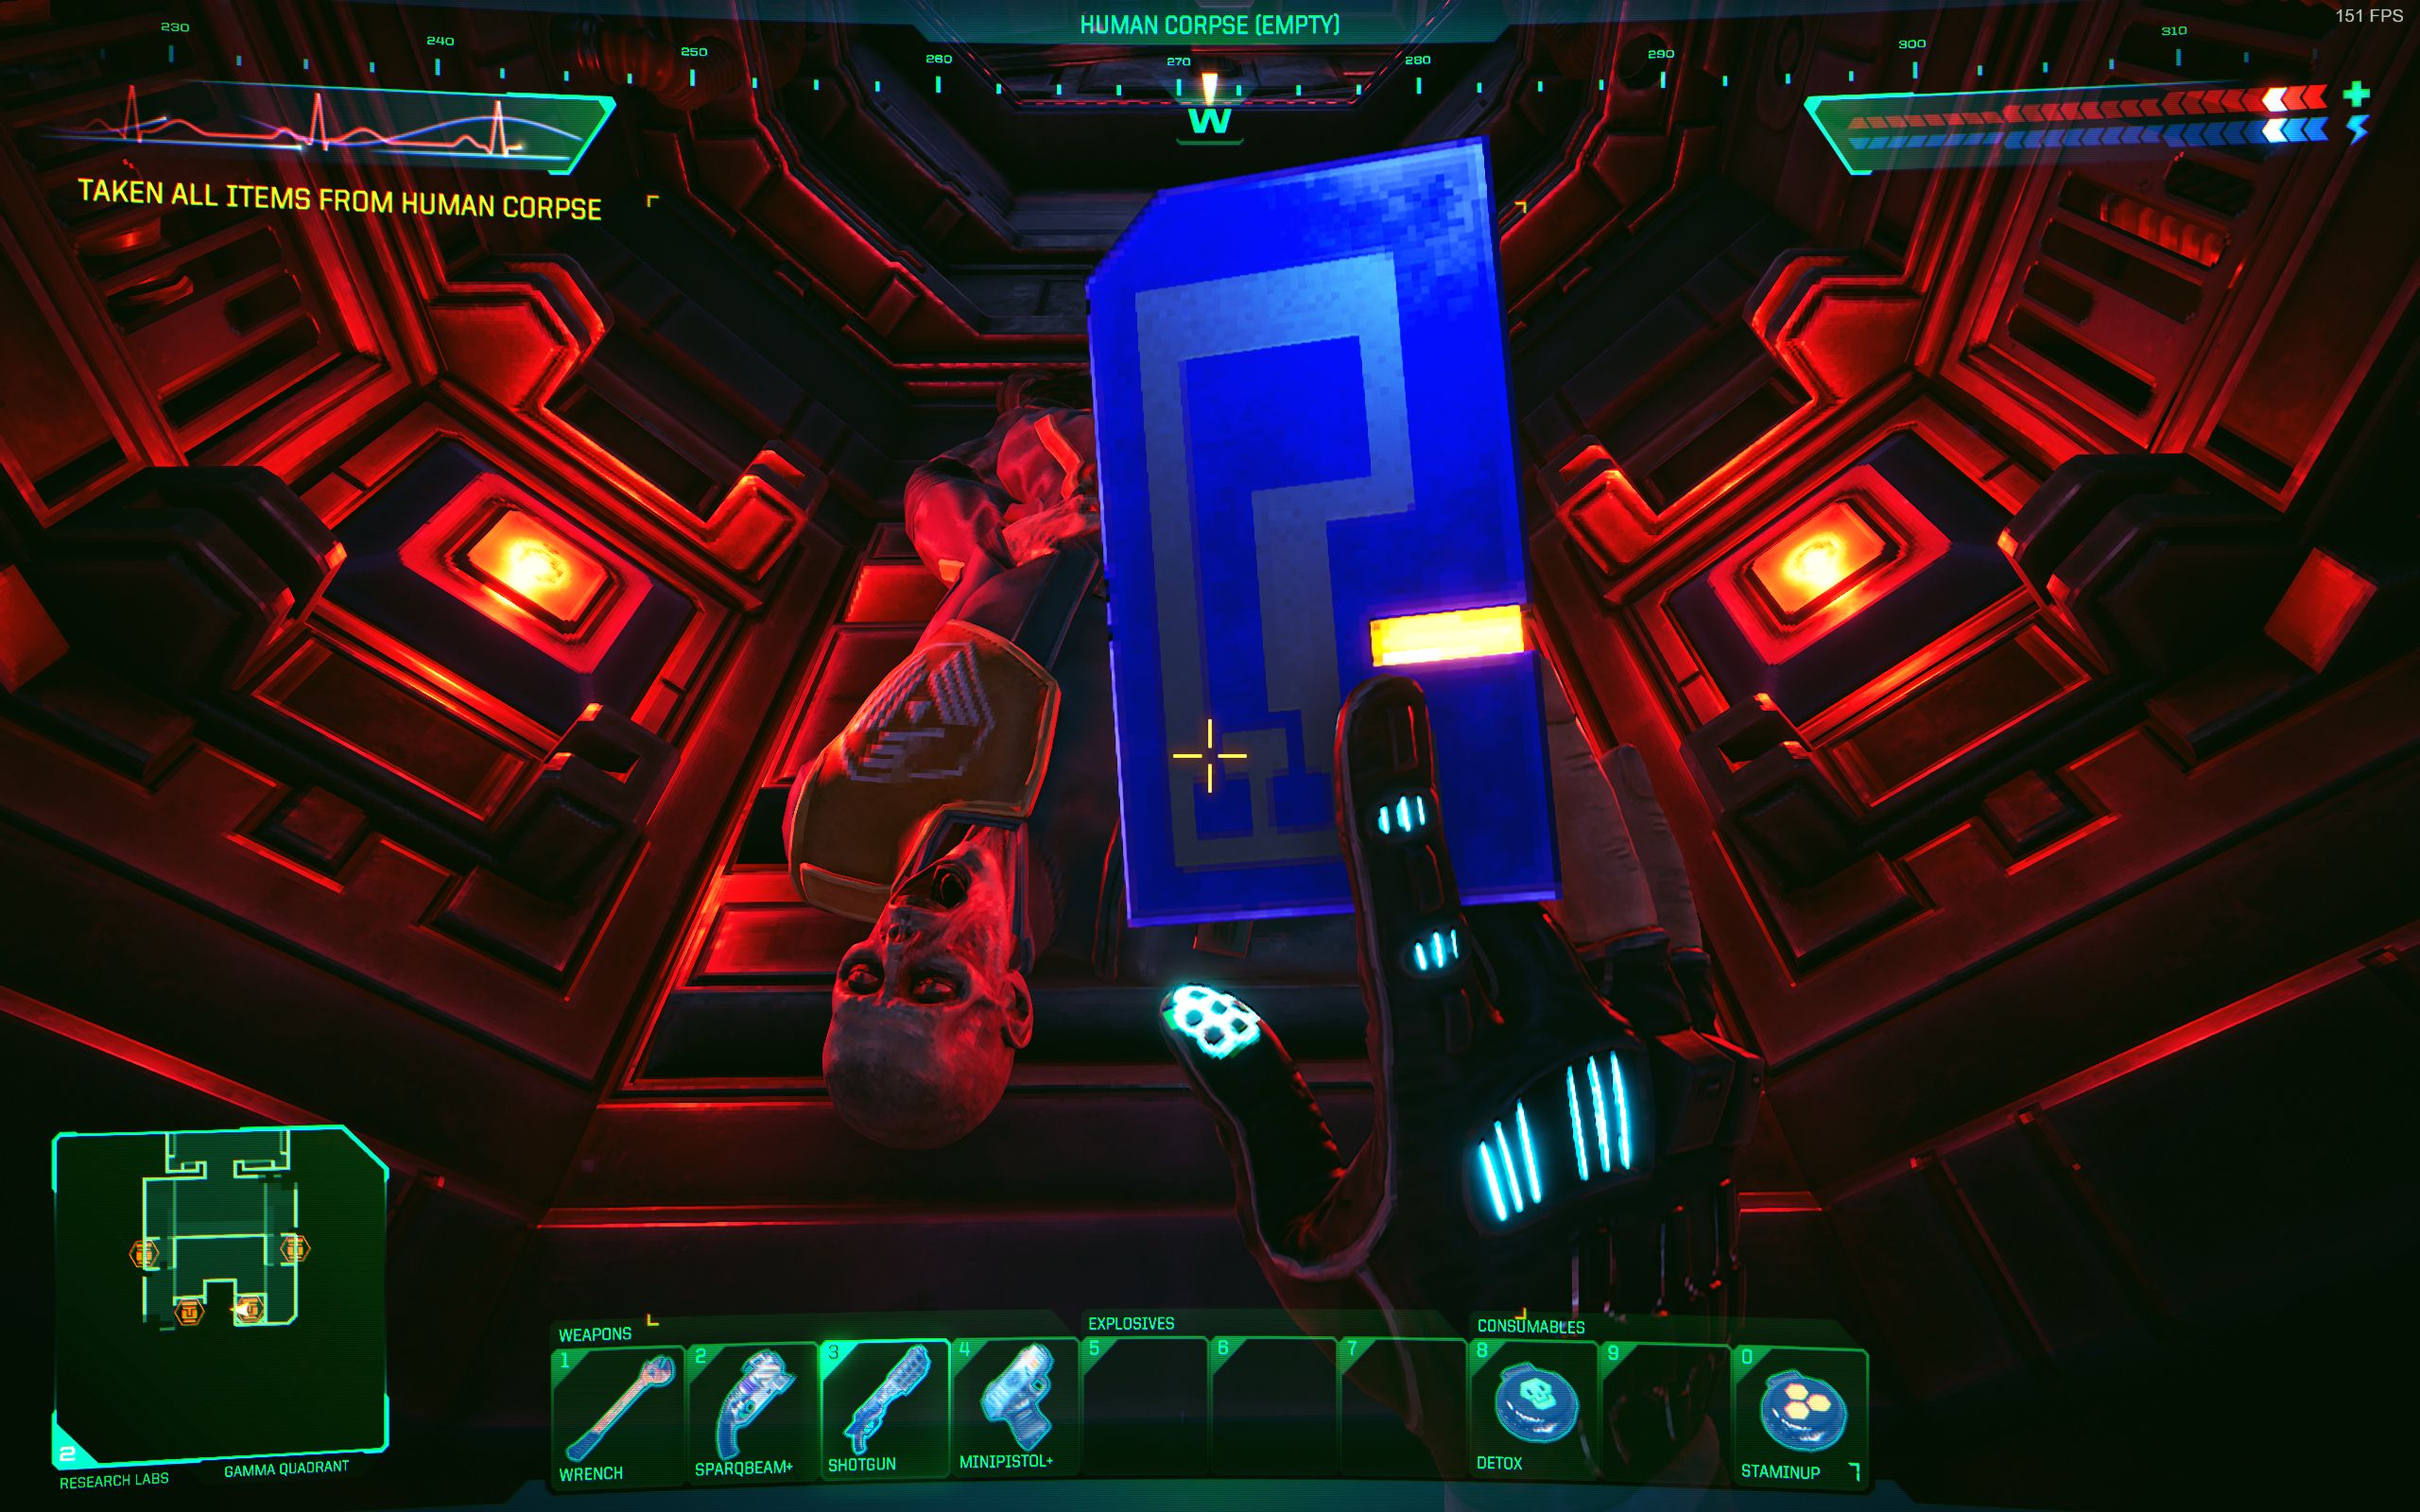 System Shock: Group 3 (GP3) access card CPU node room at research level